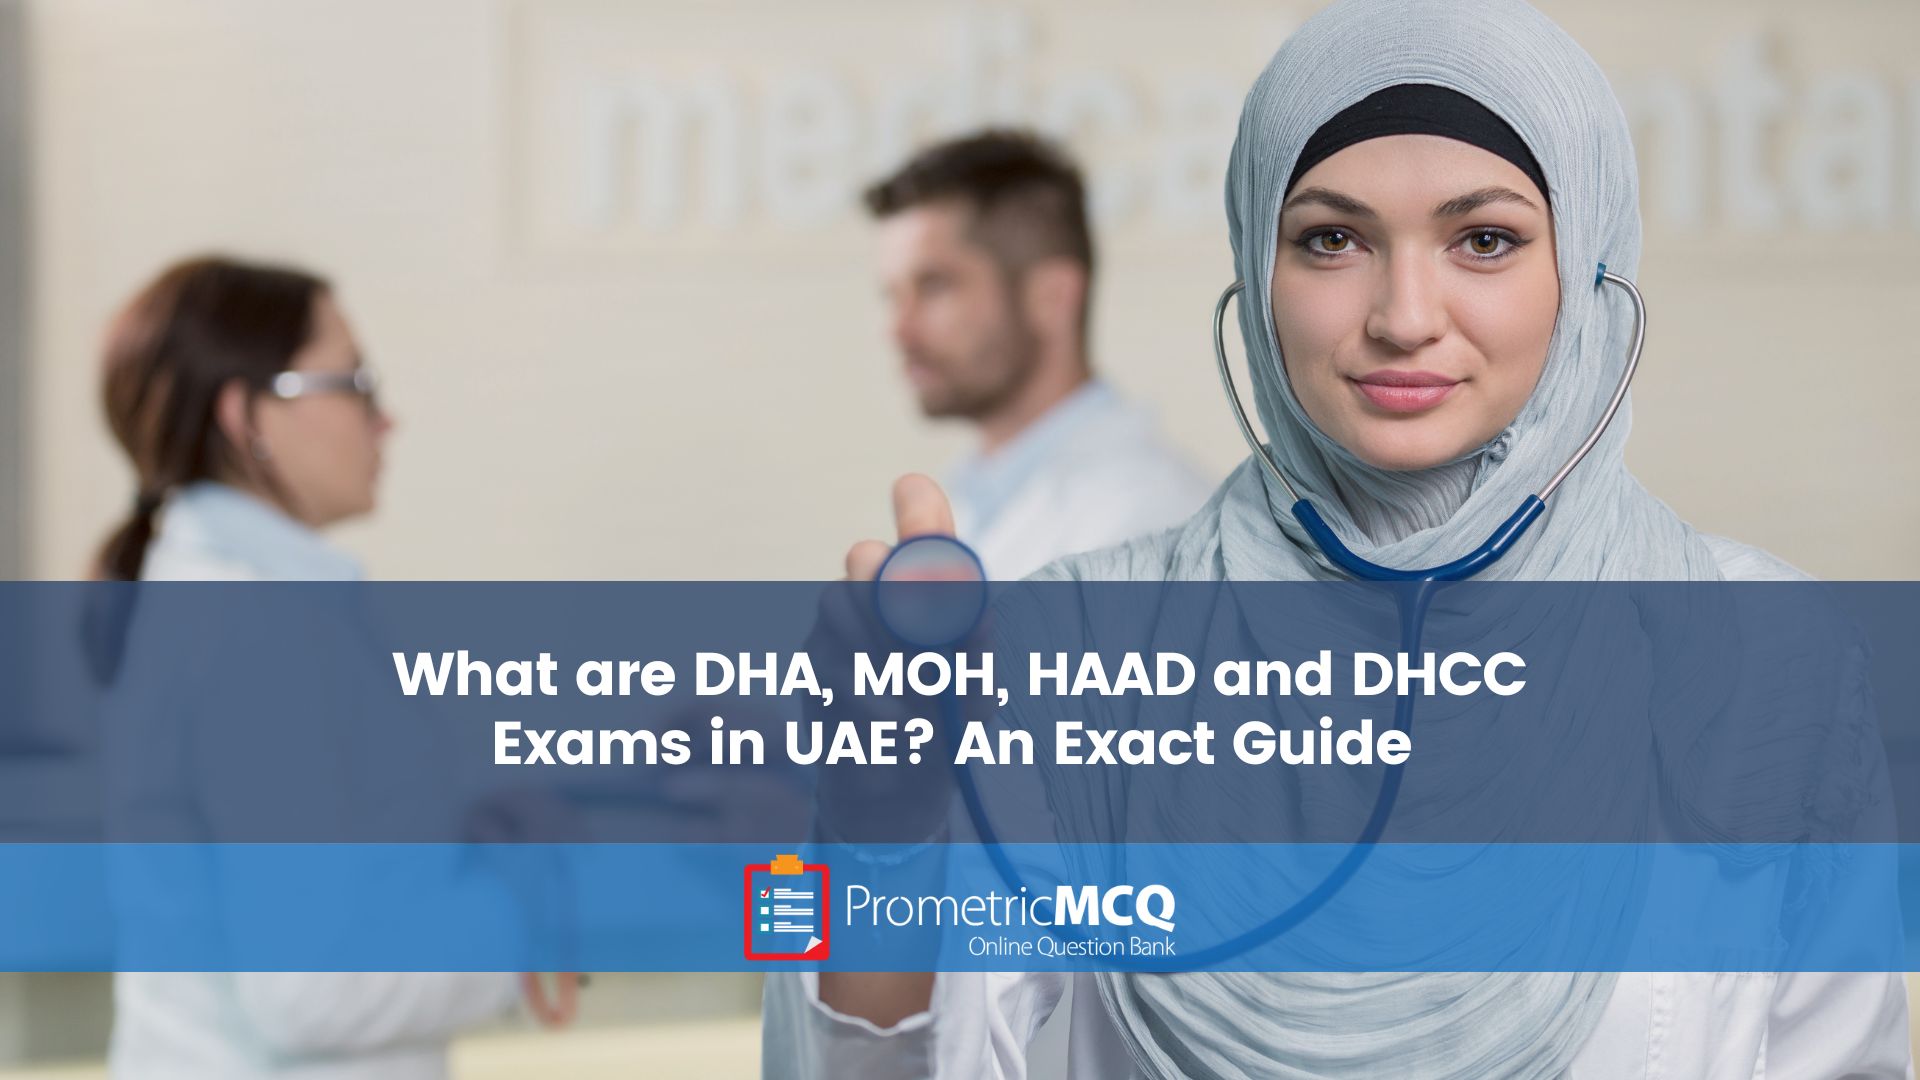 What are DHA, MOH, HAAD and DHCC Exams in UAE? An Exact Guide